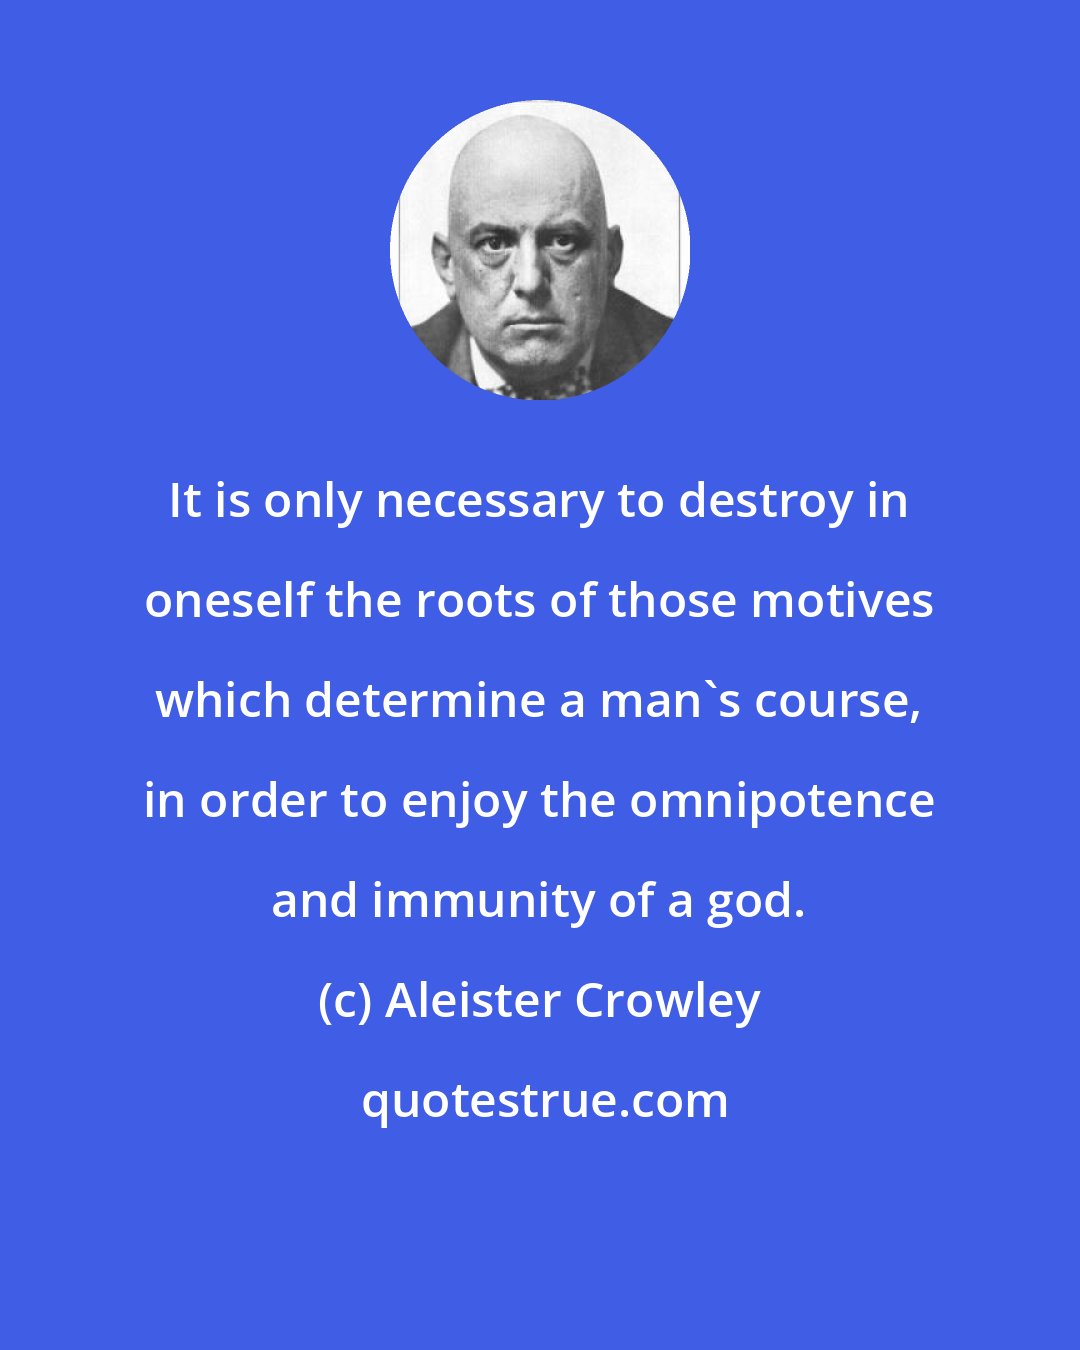 Aleister Crowley: It is only necessary to destroy in oneself the roots of those motives which determine a man's course, in order to enjoy the omnipotence and immunity of a god.